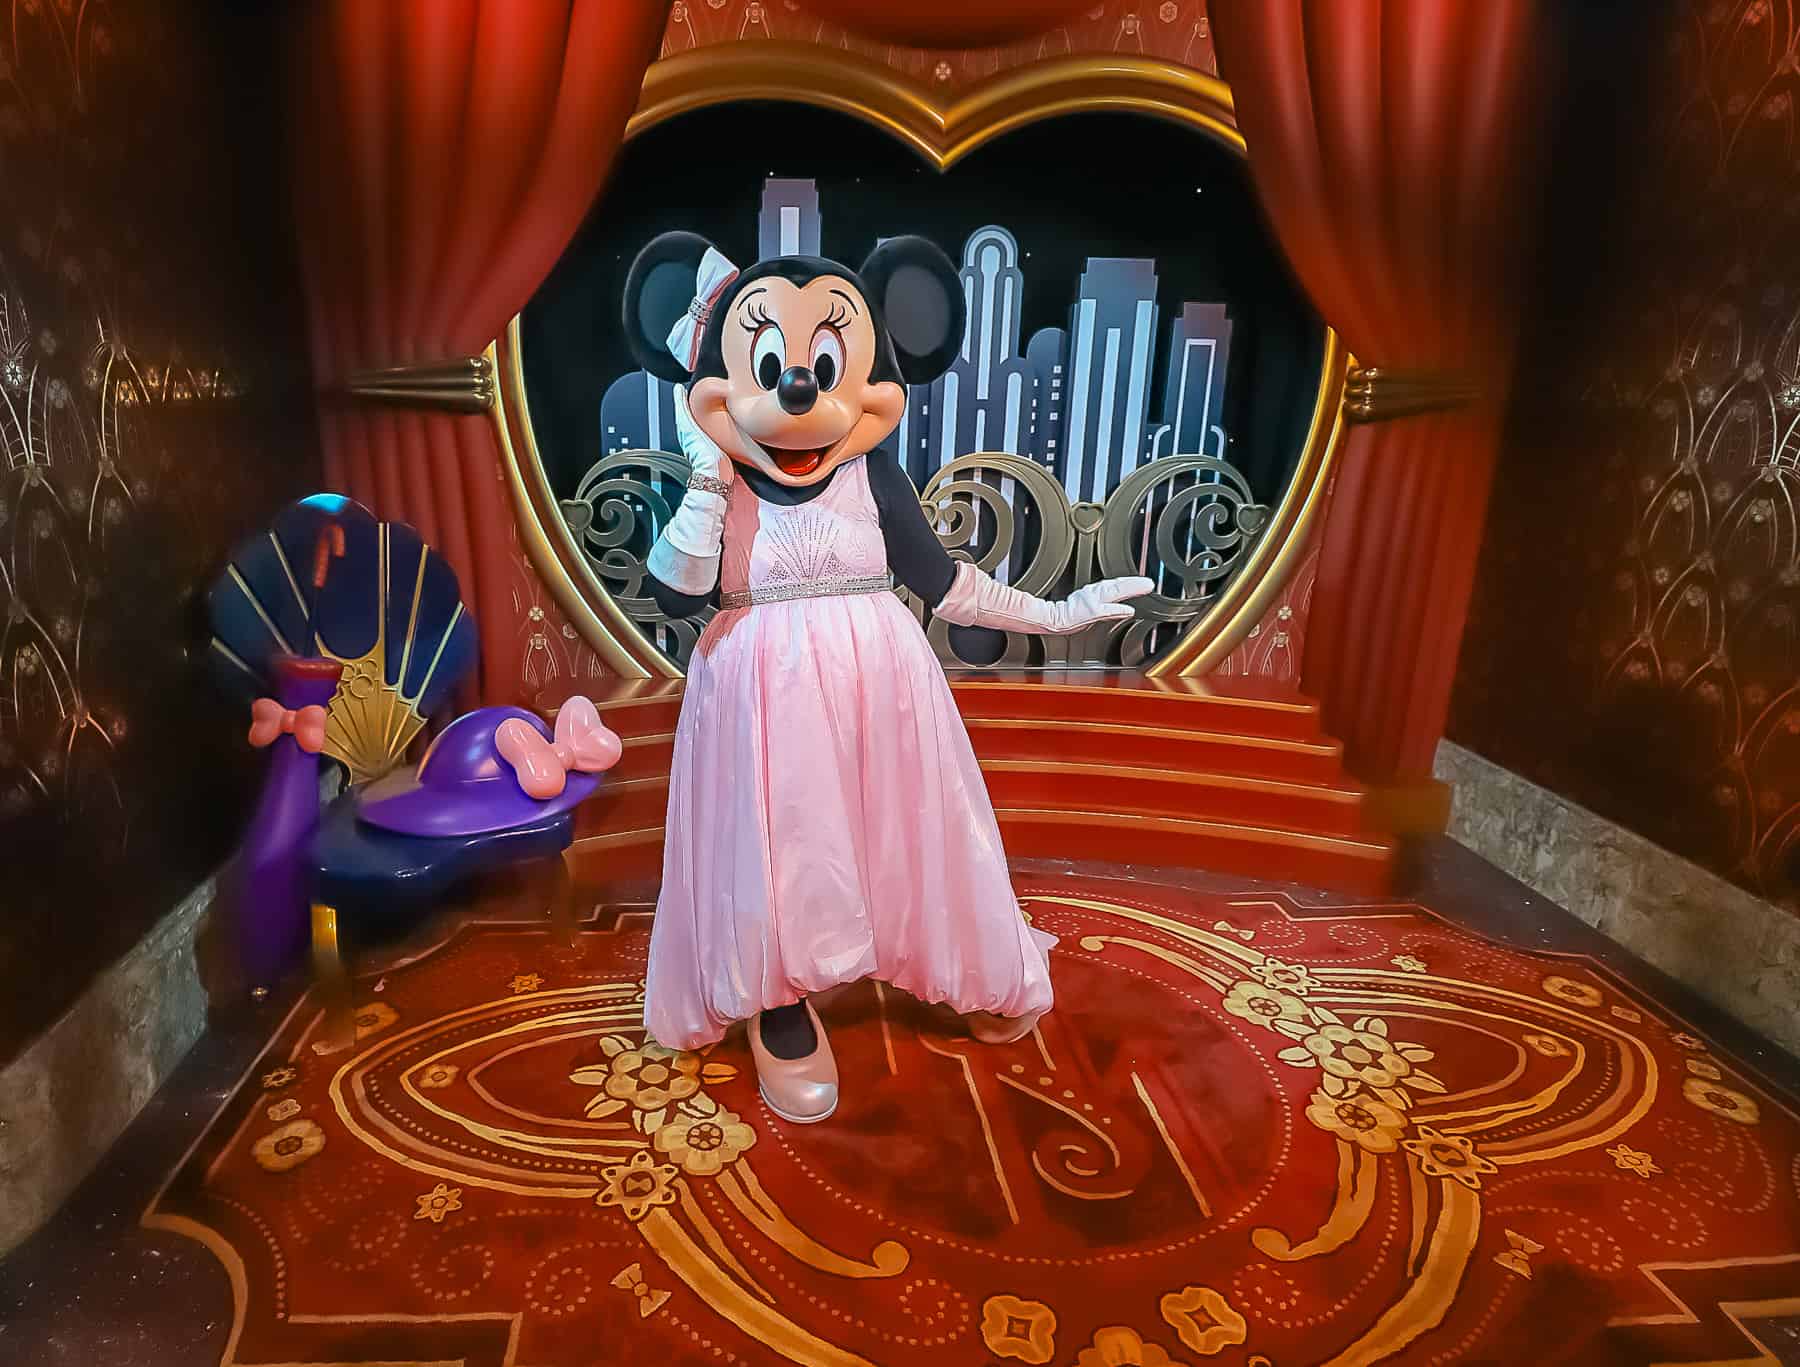 Minnie Mouse in her red carpet outfit